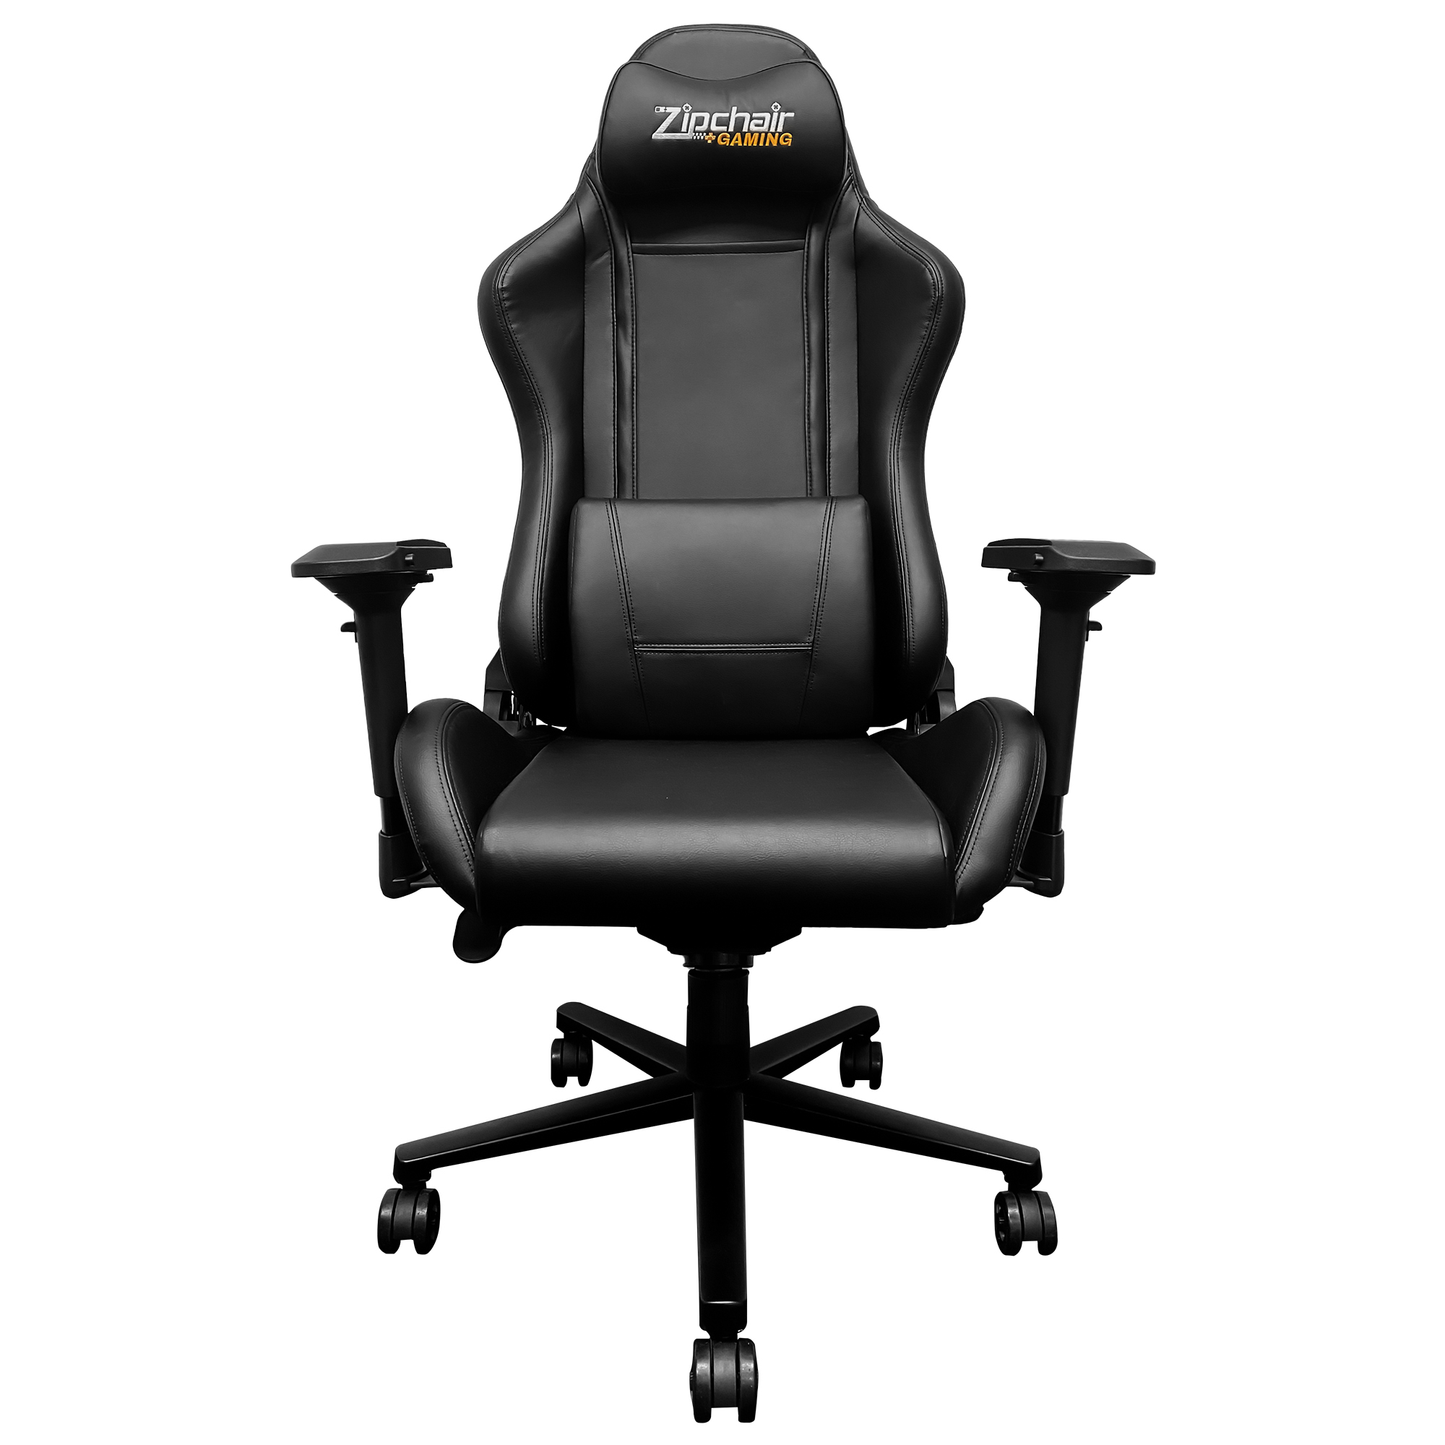 Xpression Pro Gaming Chair with St. Joseph's Hawks Logo